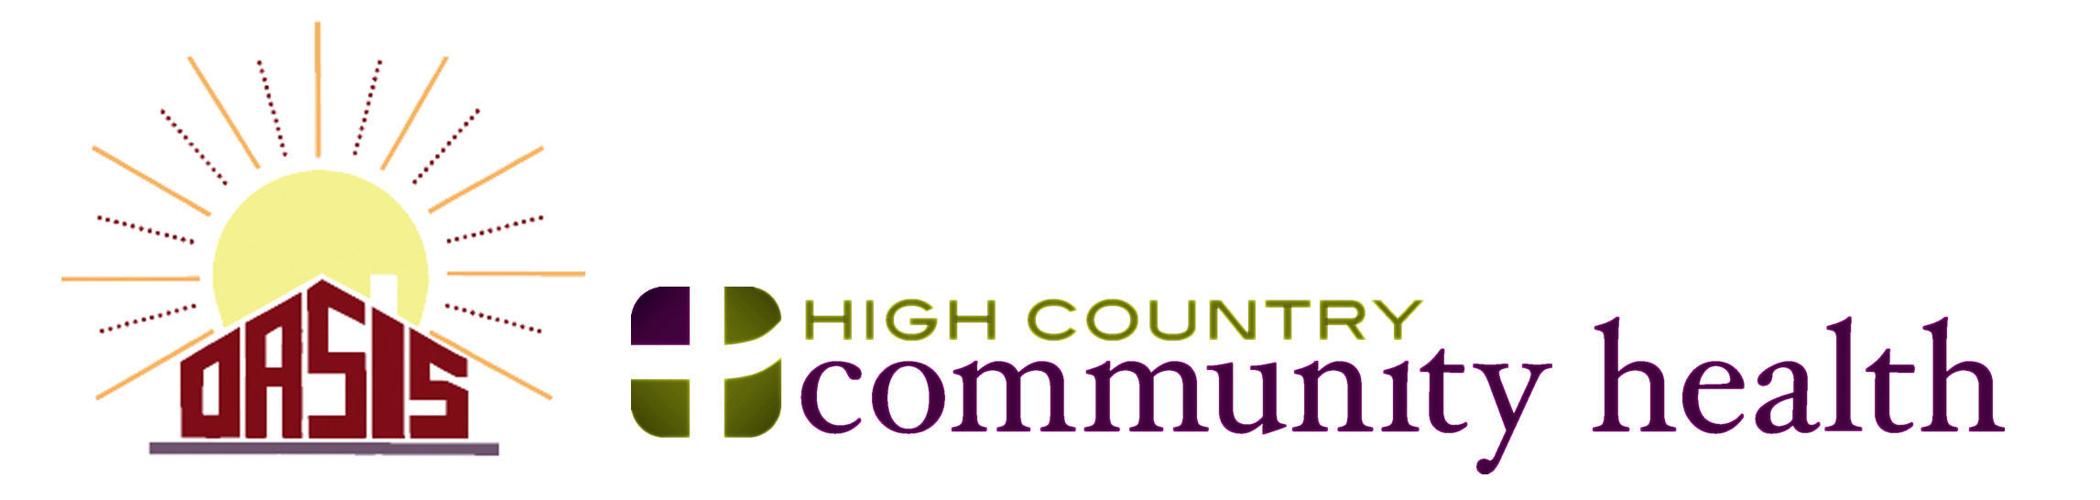 OASIS receives grant, partners with High Country Community Health to